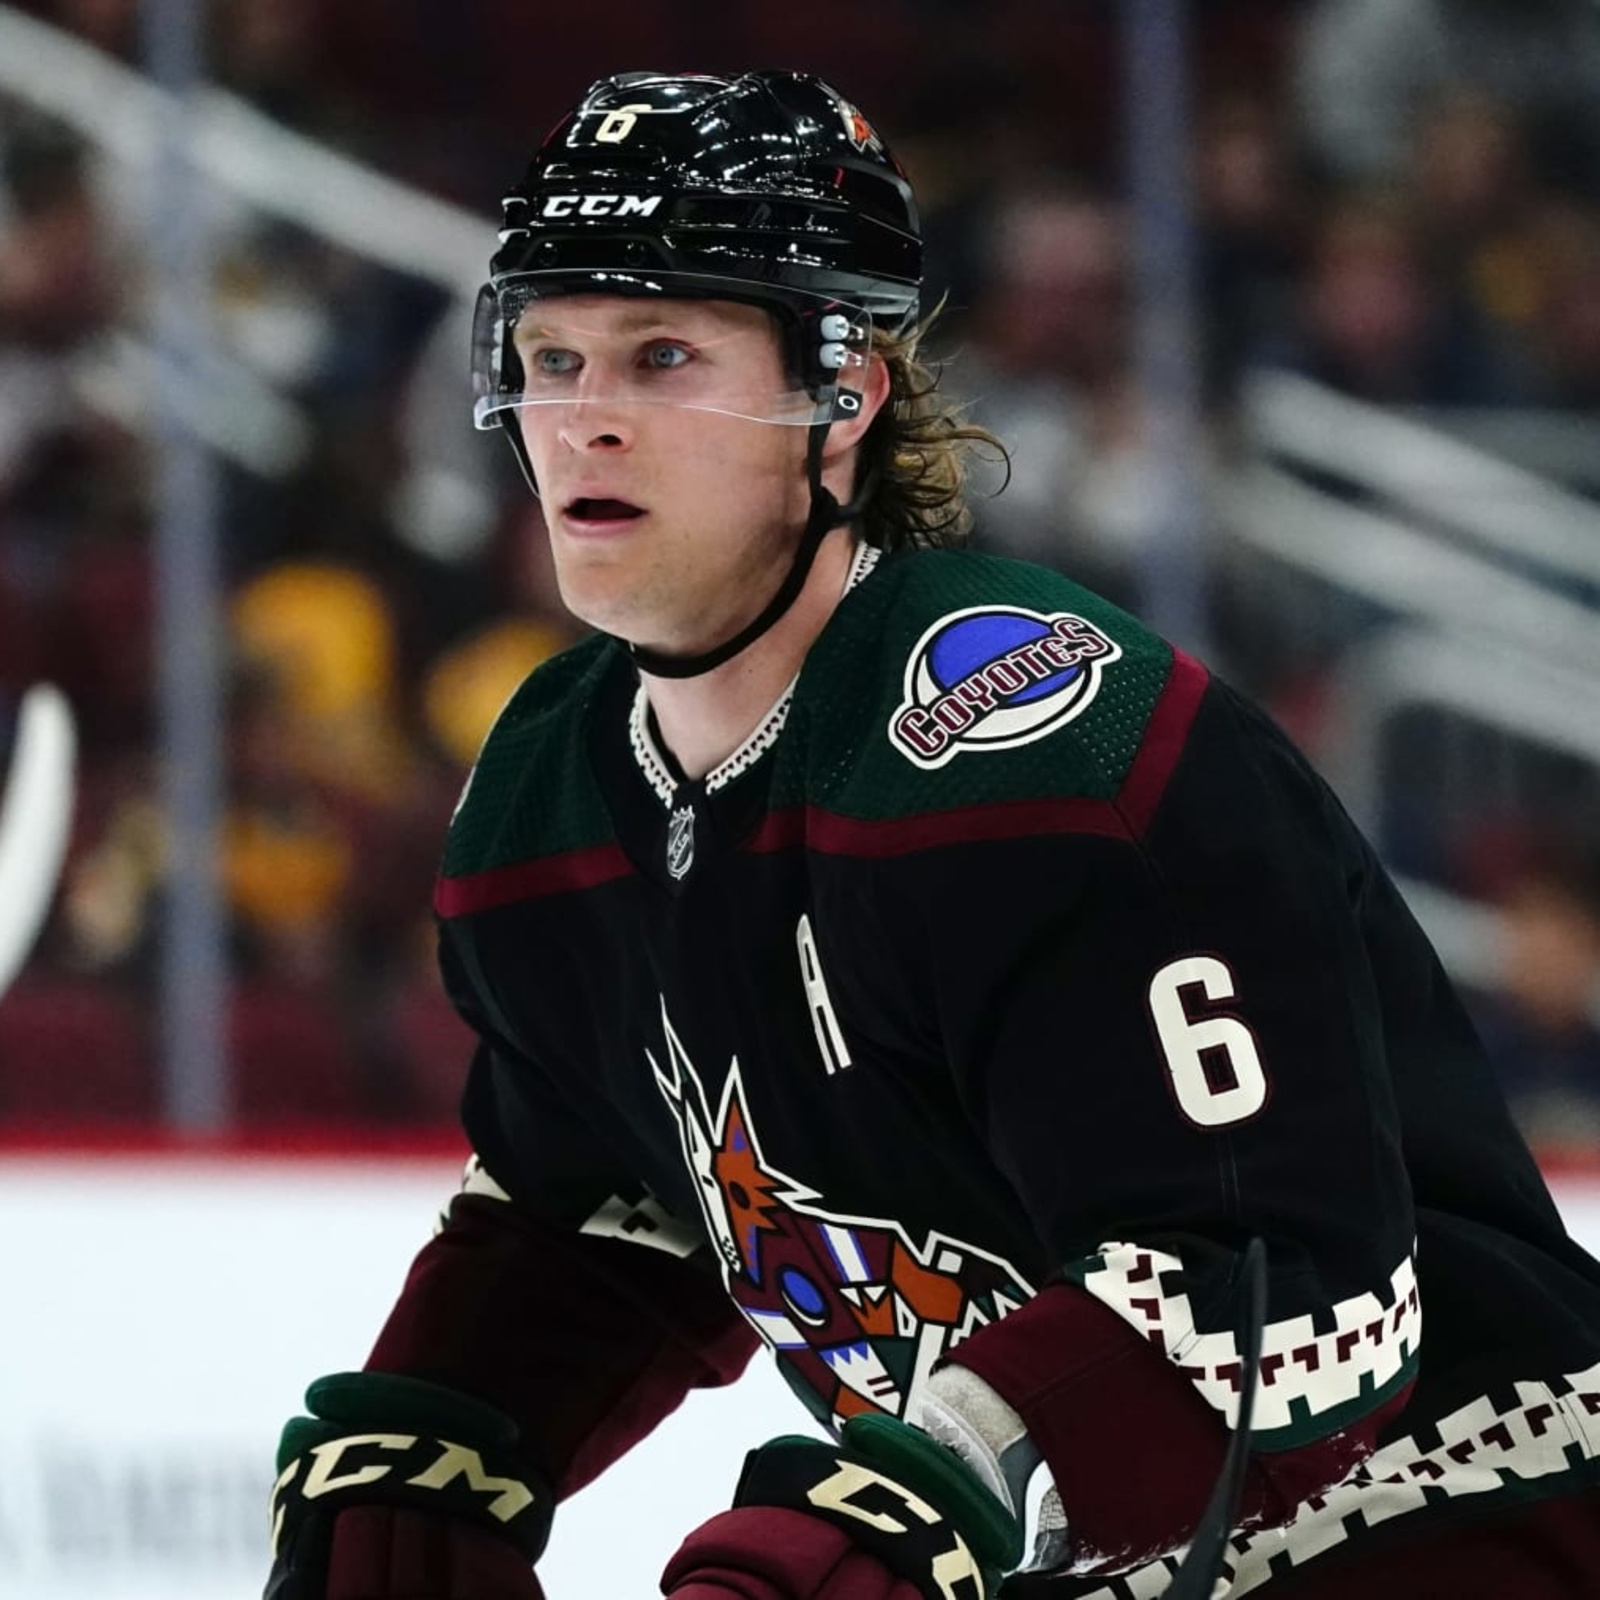 Making sense of the drawn-out drama with Coyotes defenseman Jakob Chychrun  - PHNX